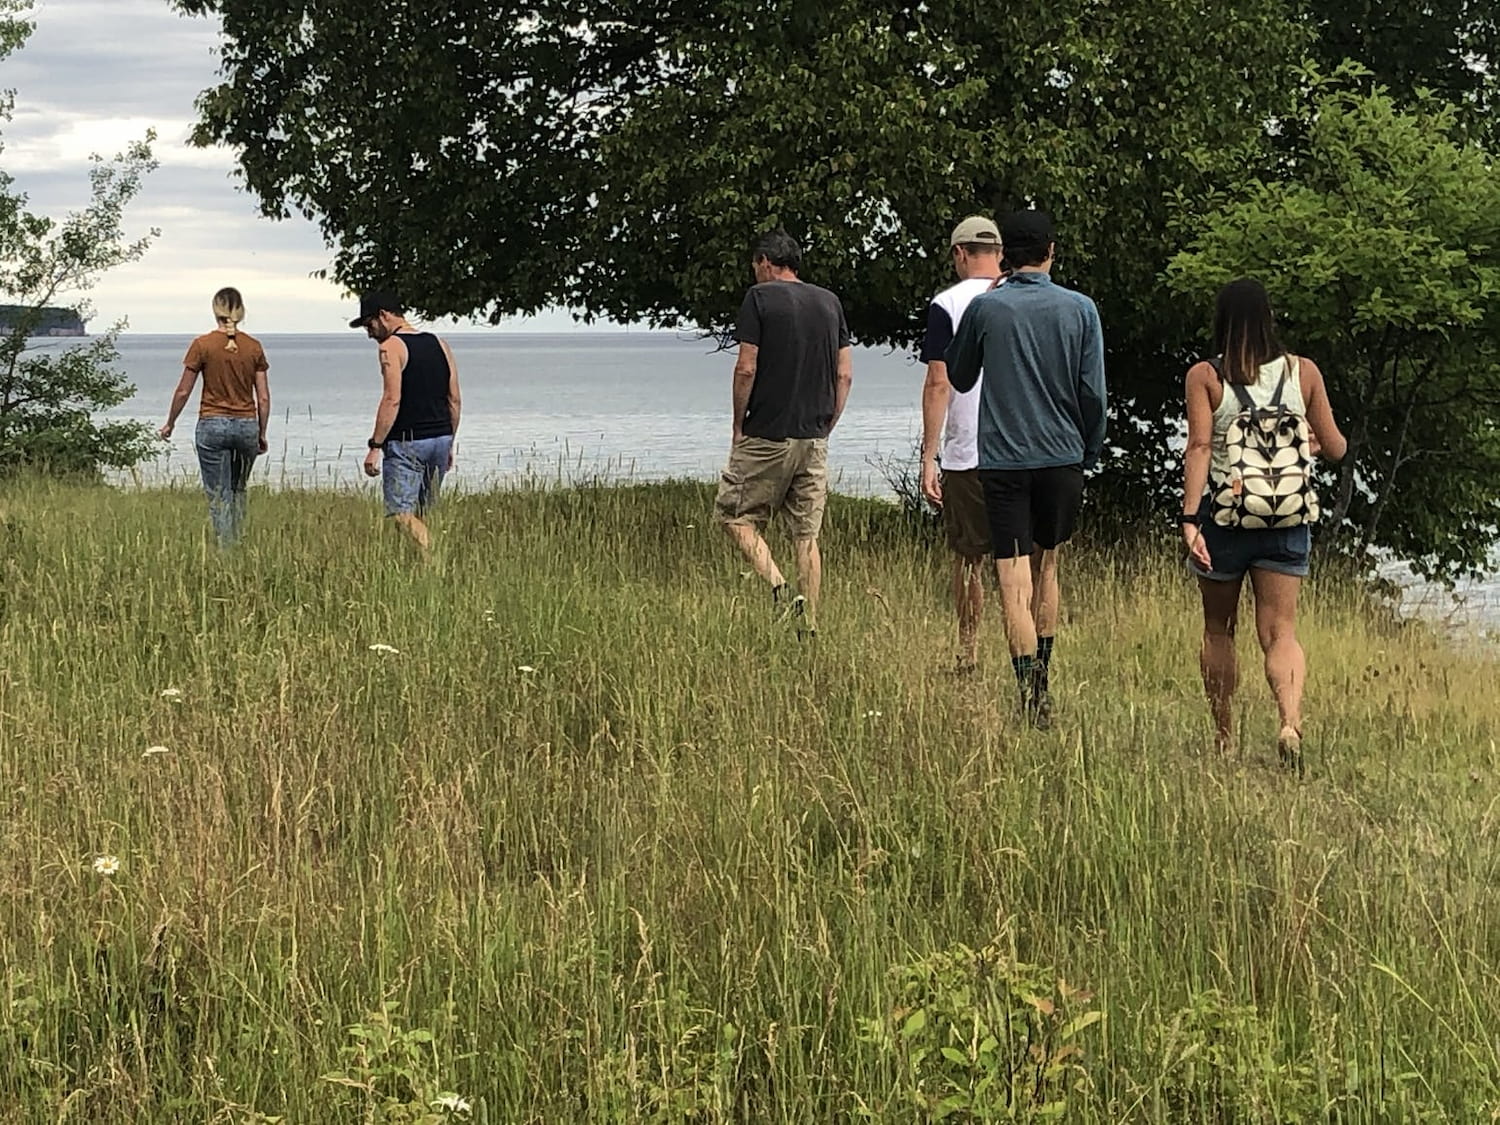 group walking on trail through a field